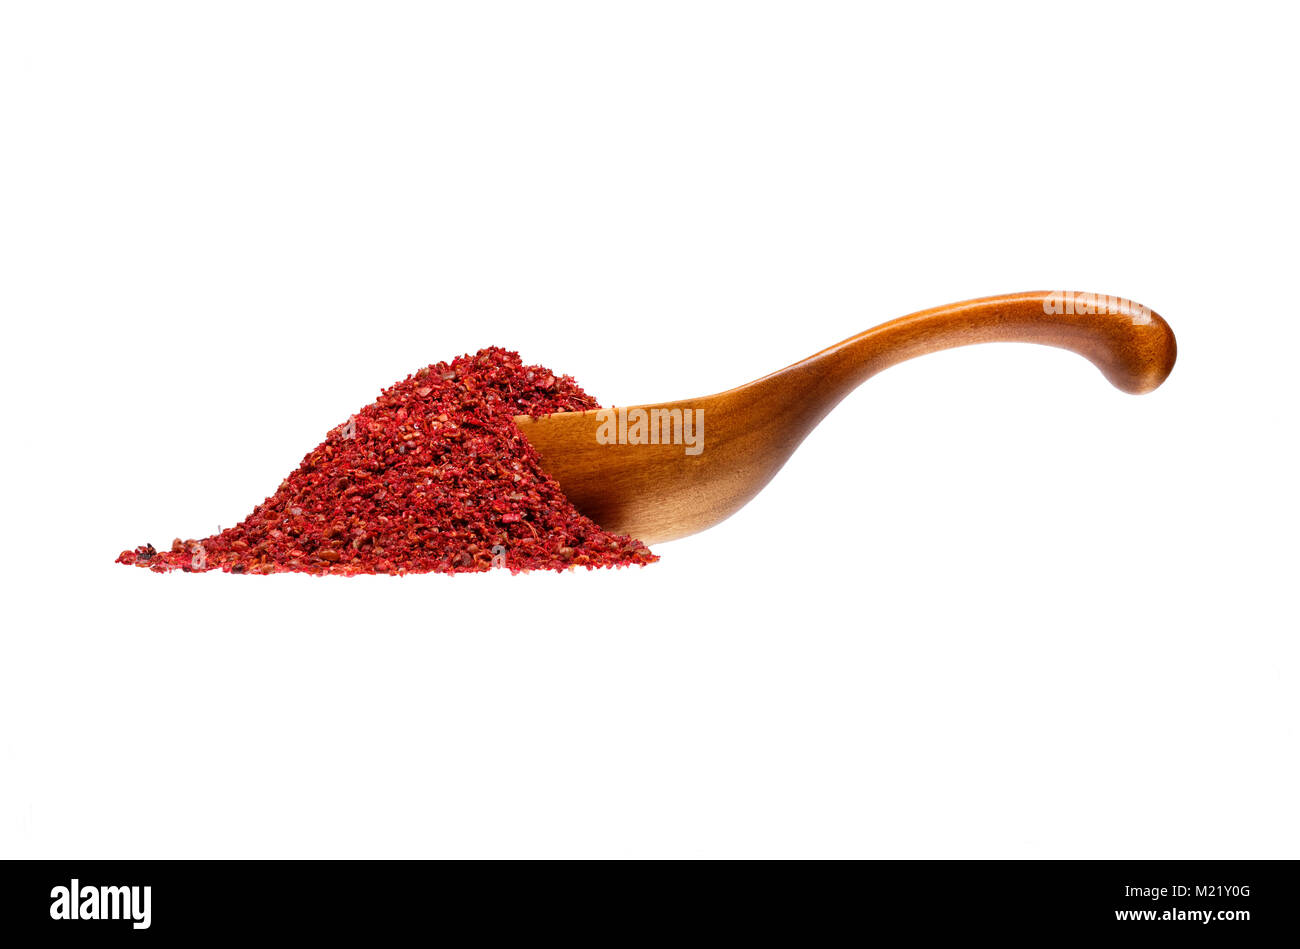 Sumac in the wooden spoon, isolated on white background. Stock Photo